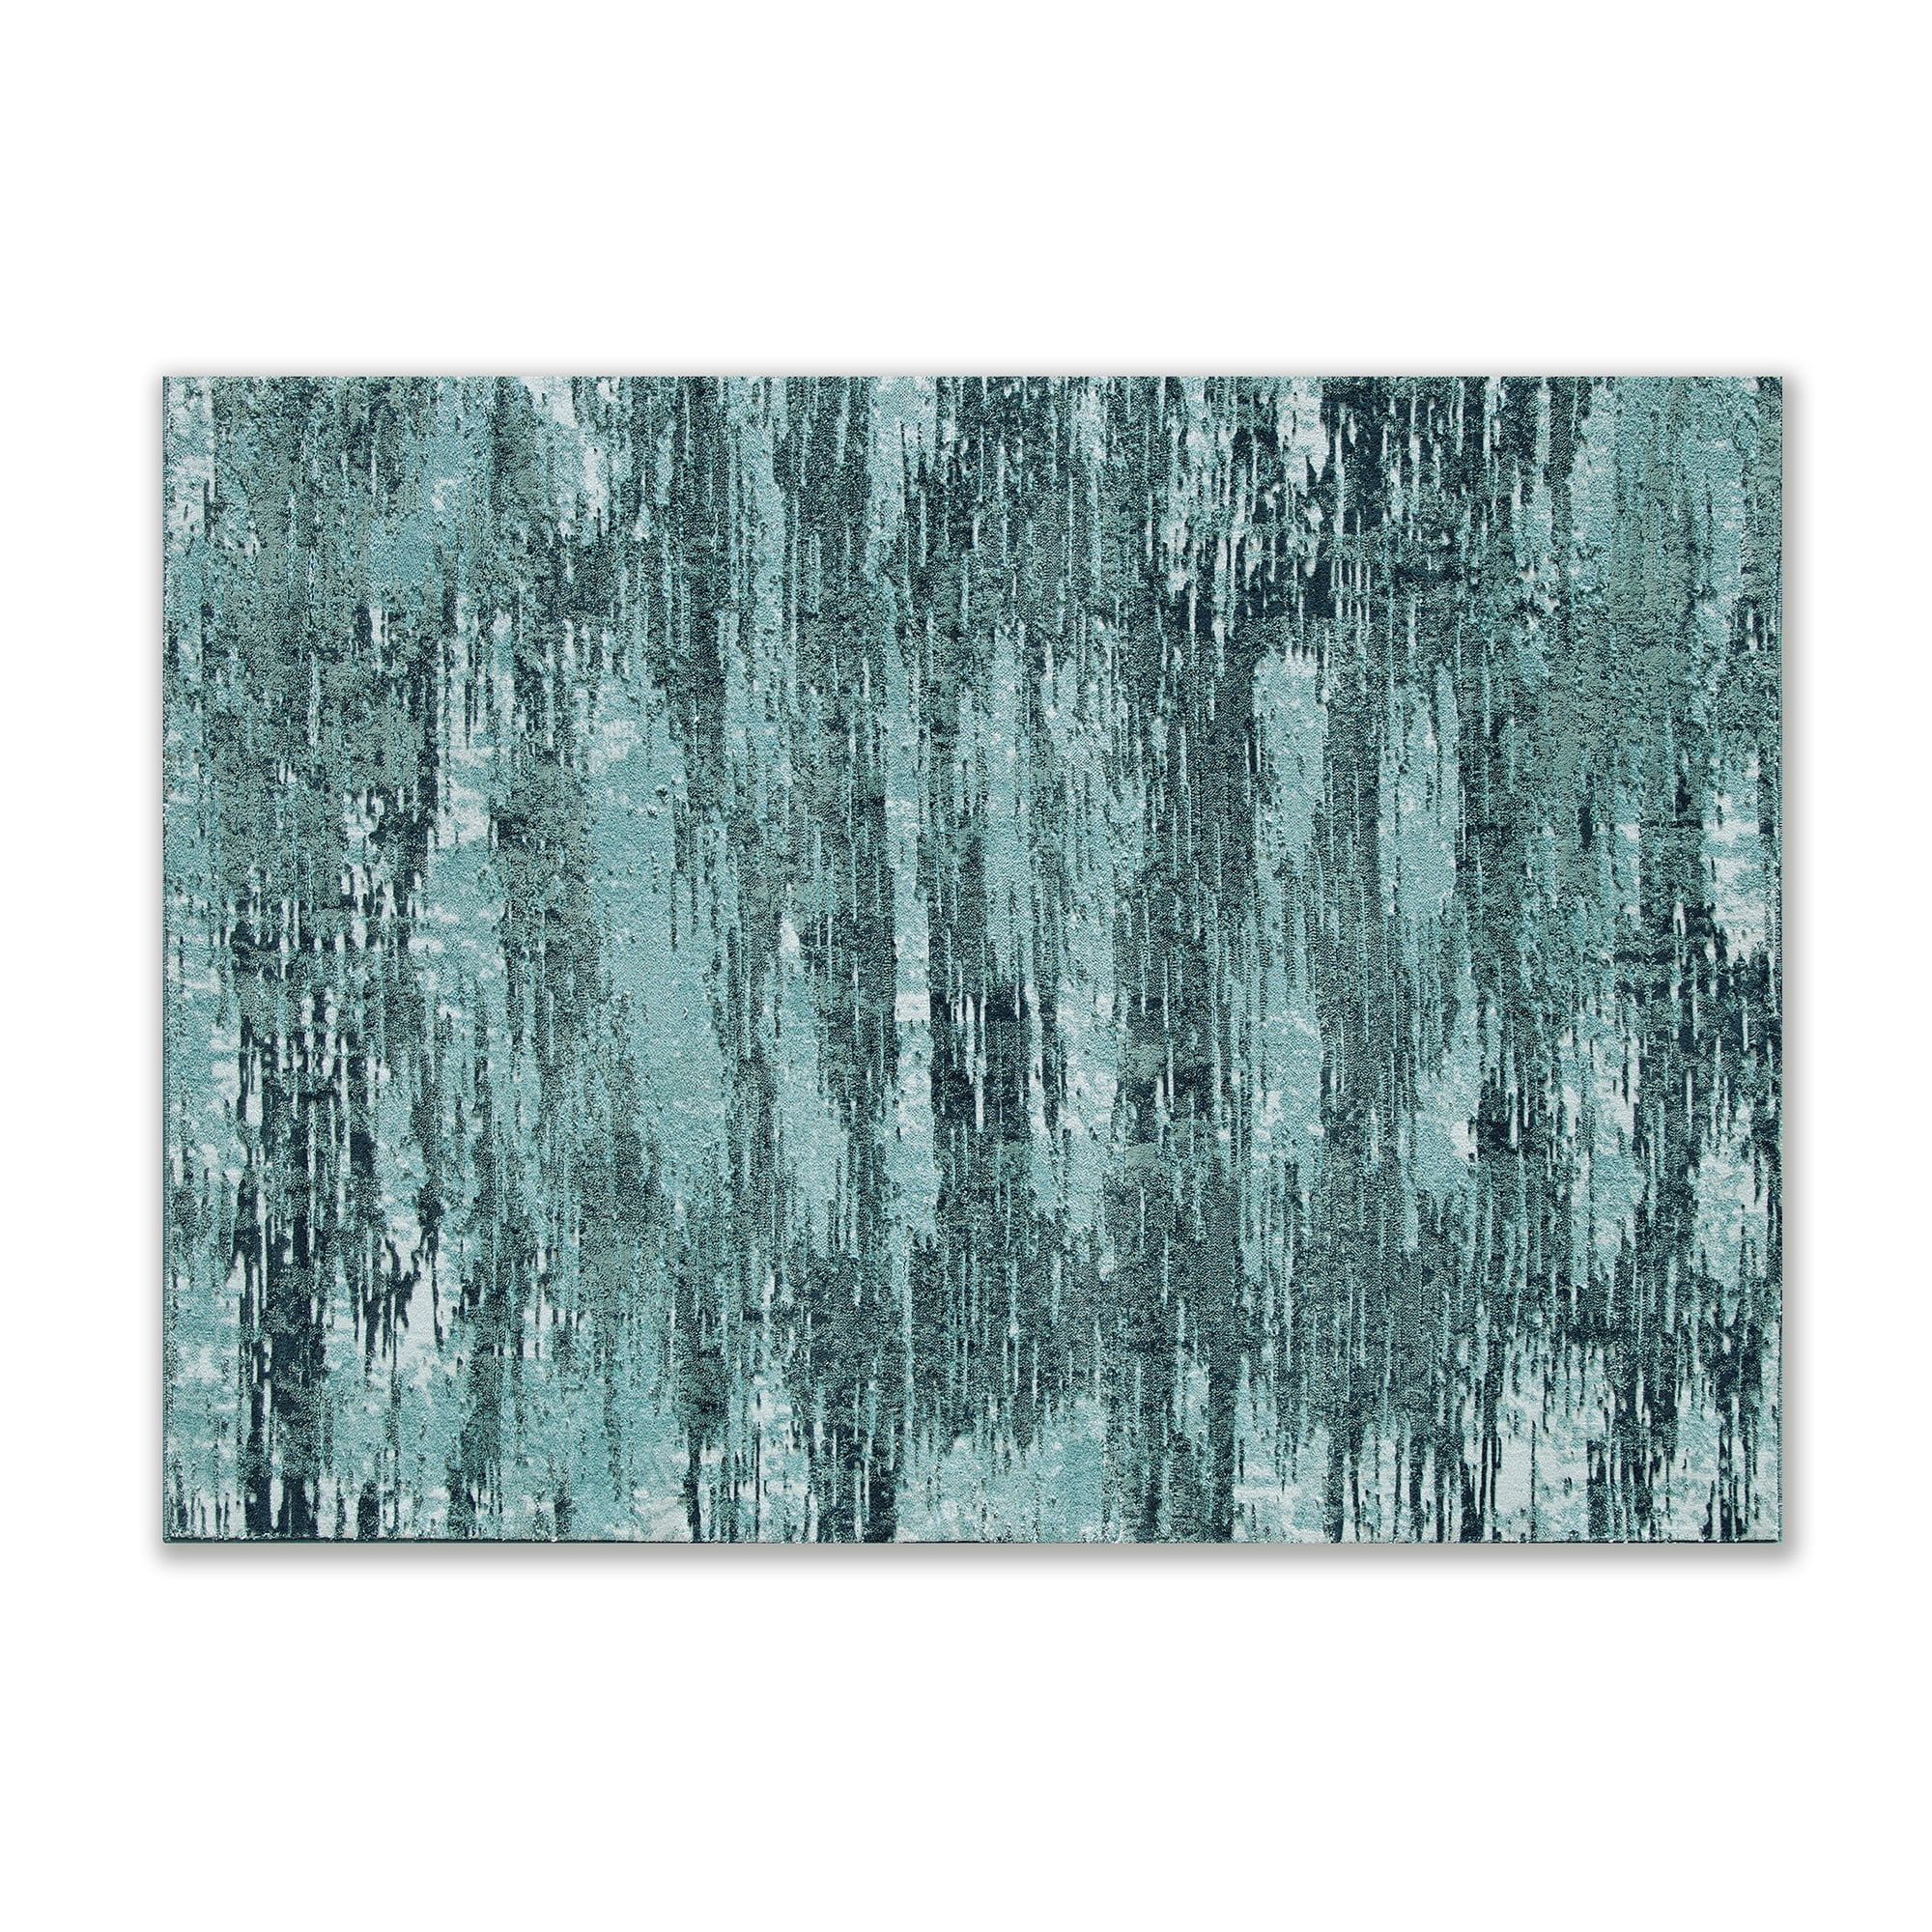 Better Homes & Gardens Teal Tonal Abstract Area Rug, 5' x 7'